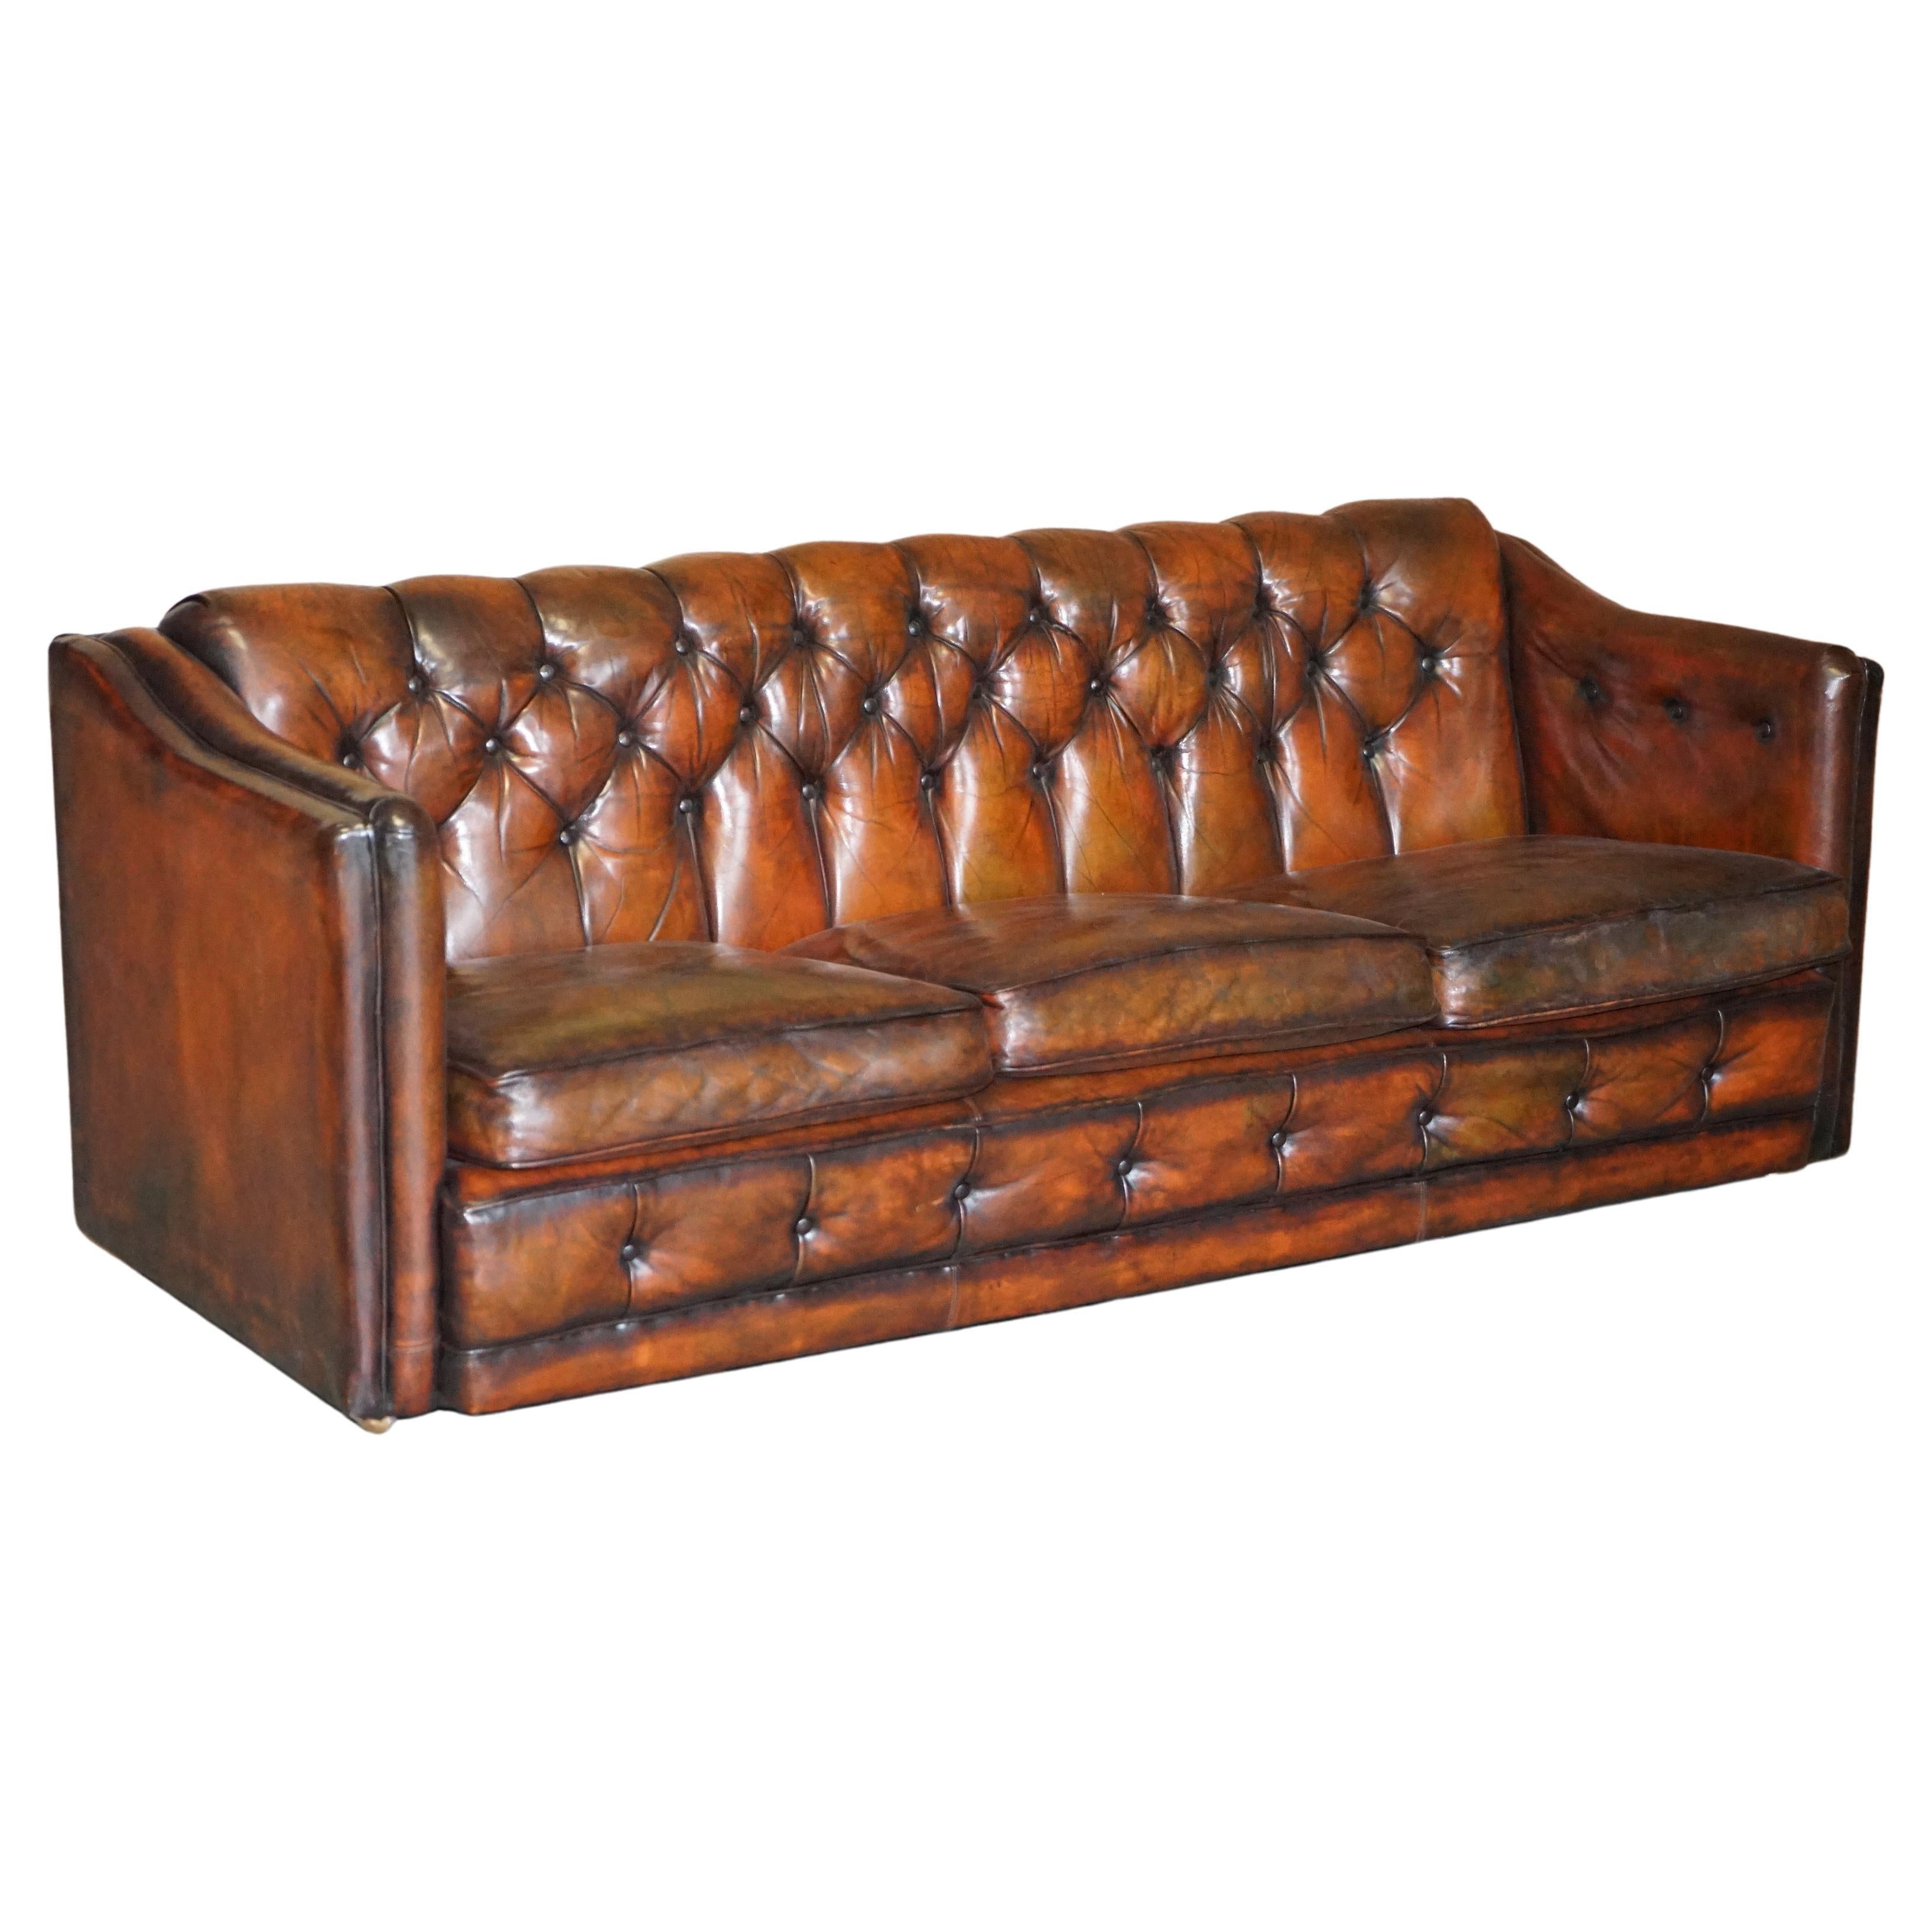 Circa 1920's Art Deco Fully Restored Chesterfield Brown Leather Sofa Part Suite